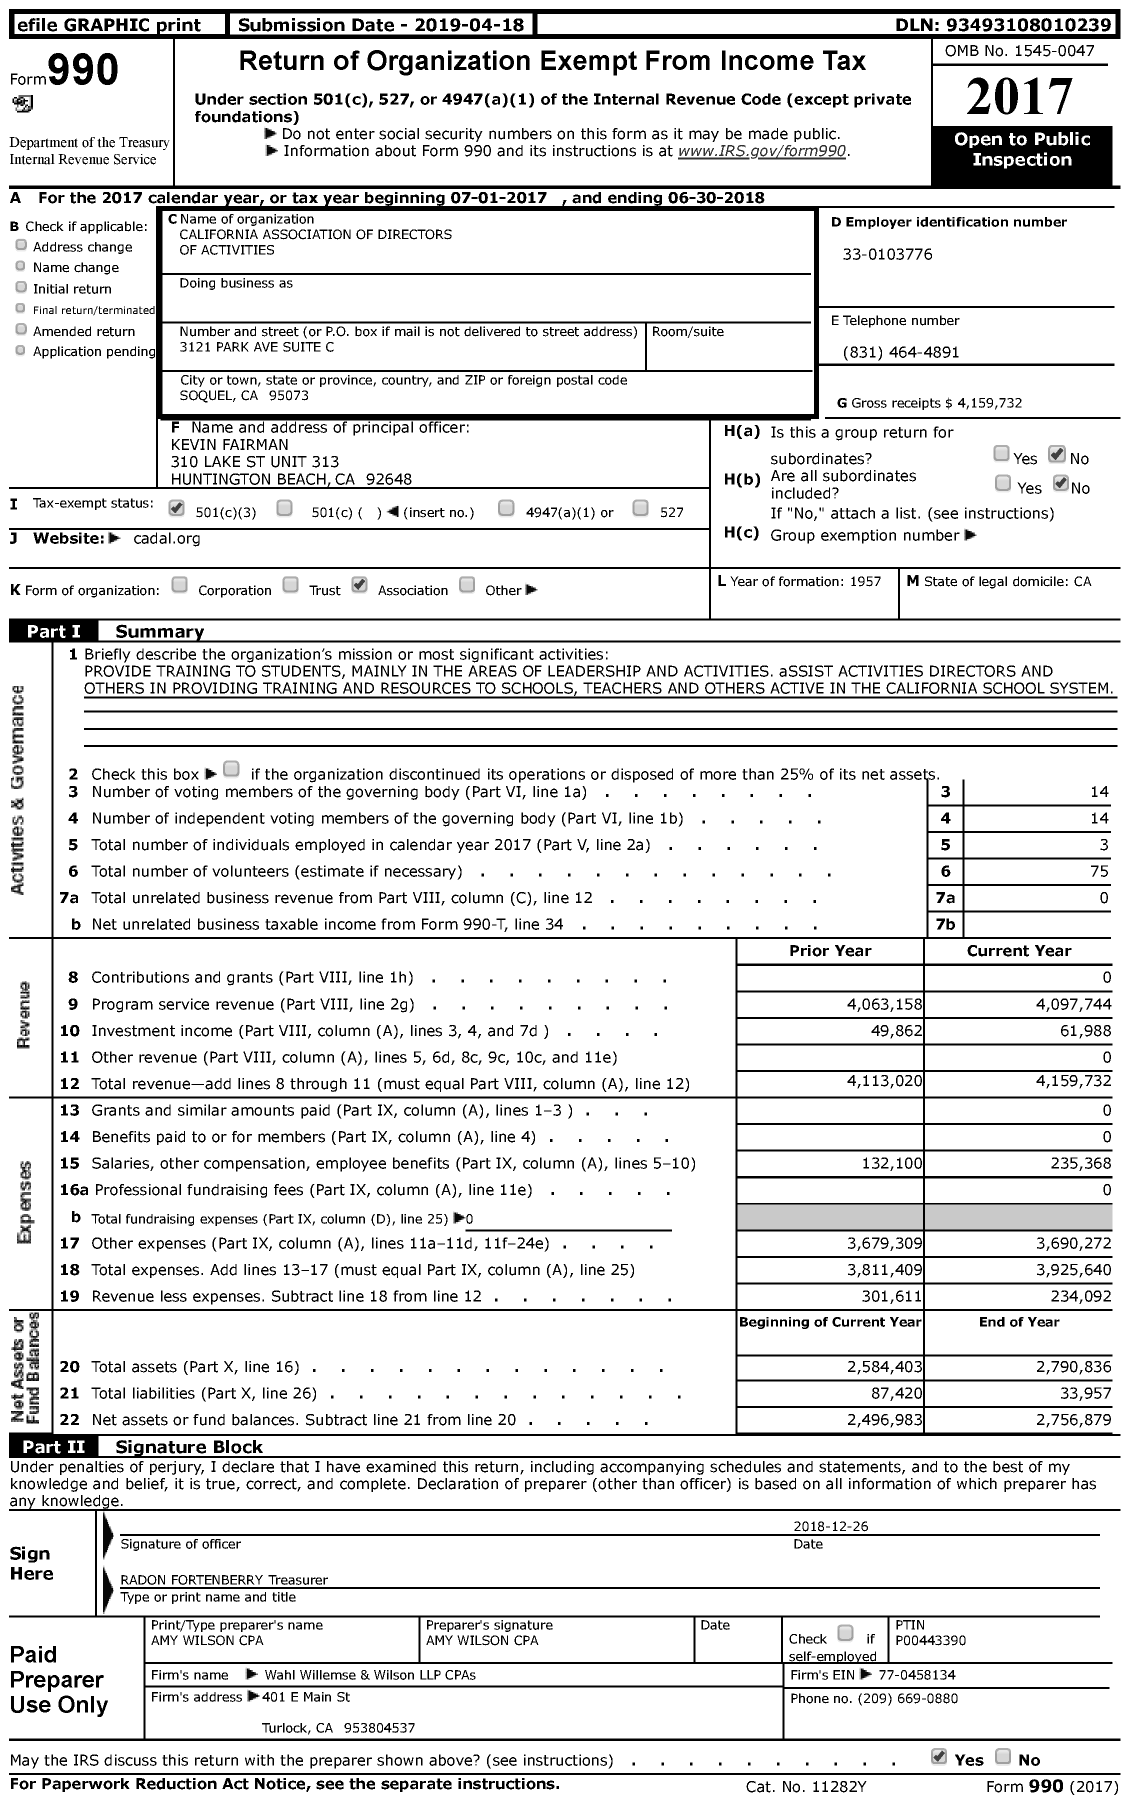 Image of first page of 2017 Form 990 for California Association of Directors of Activities